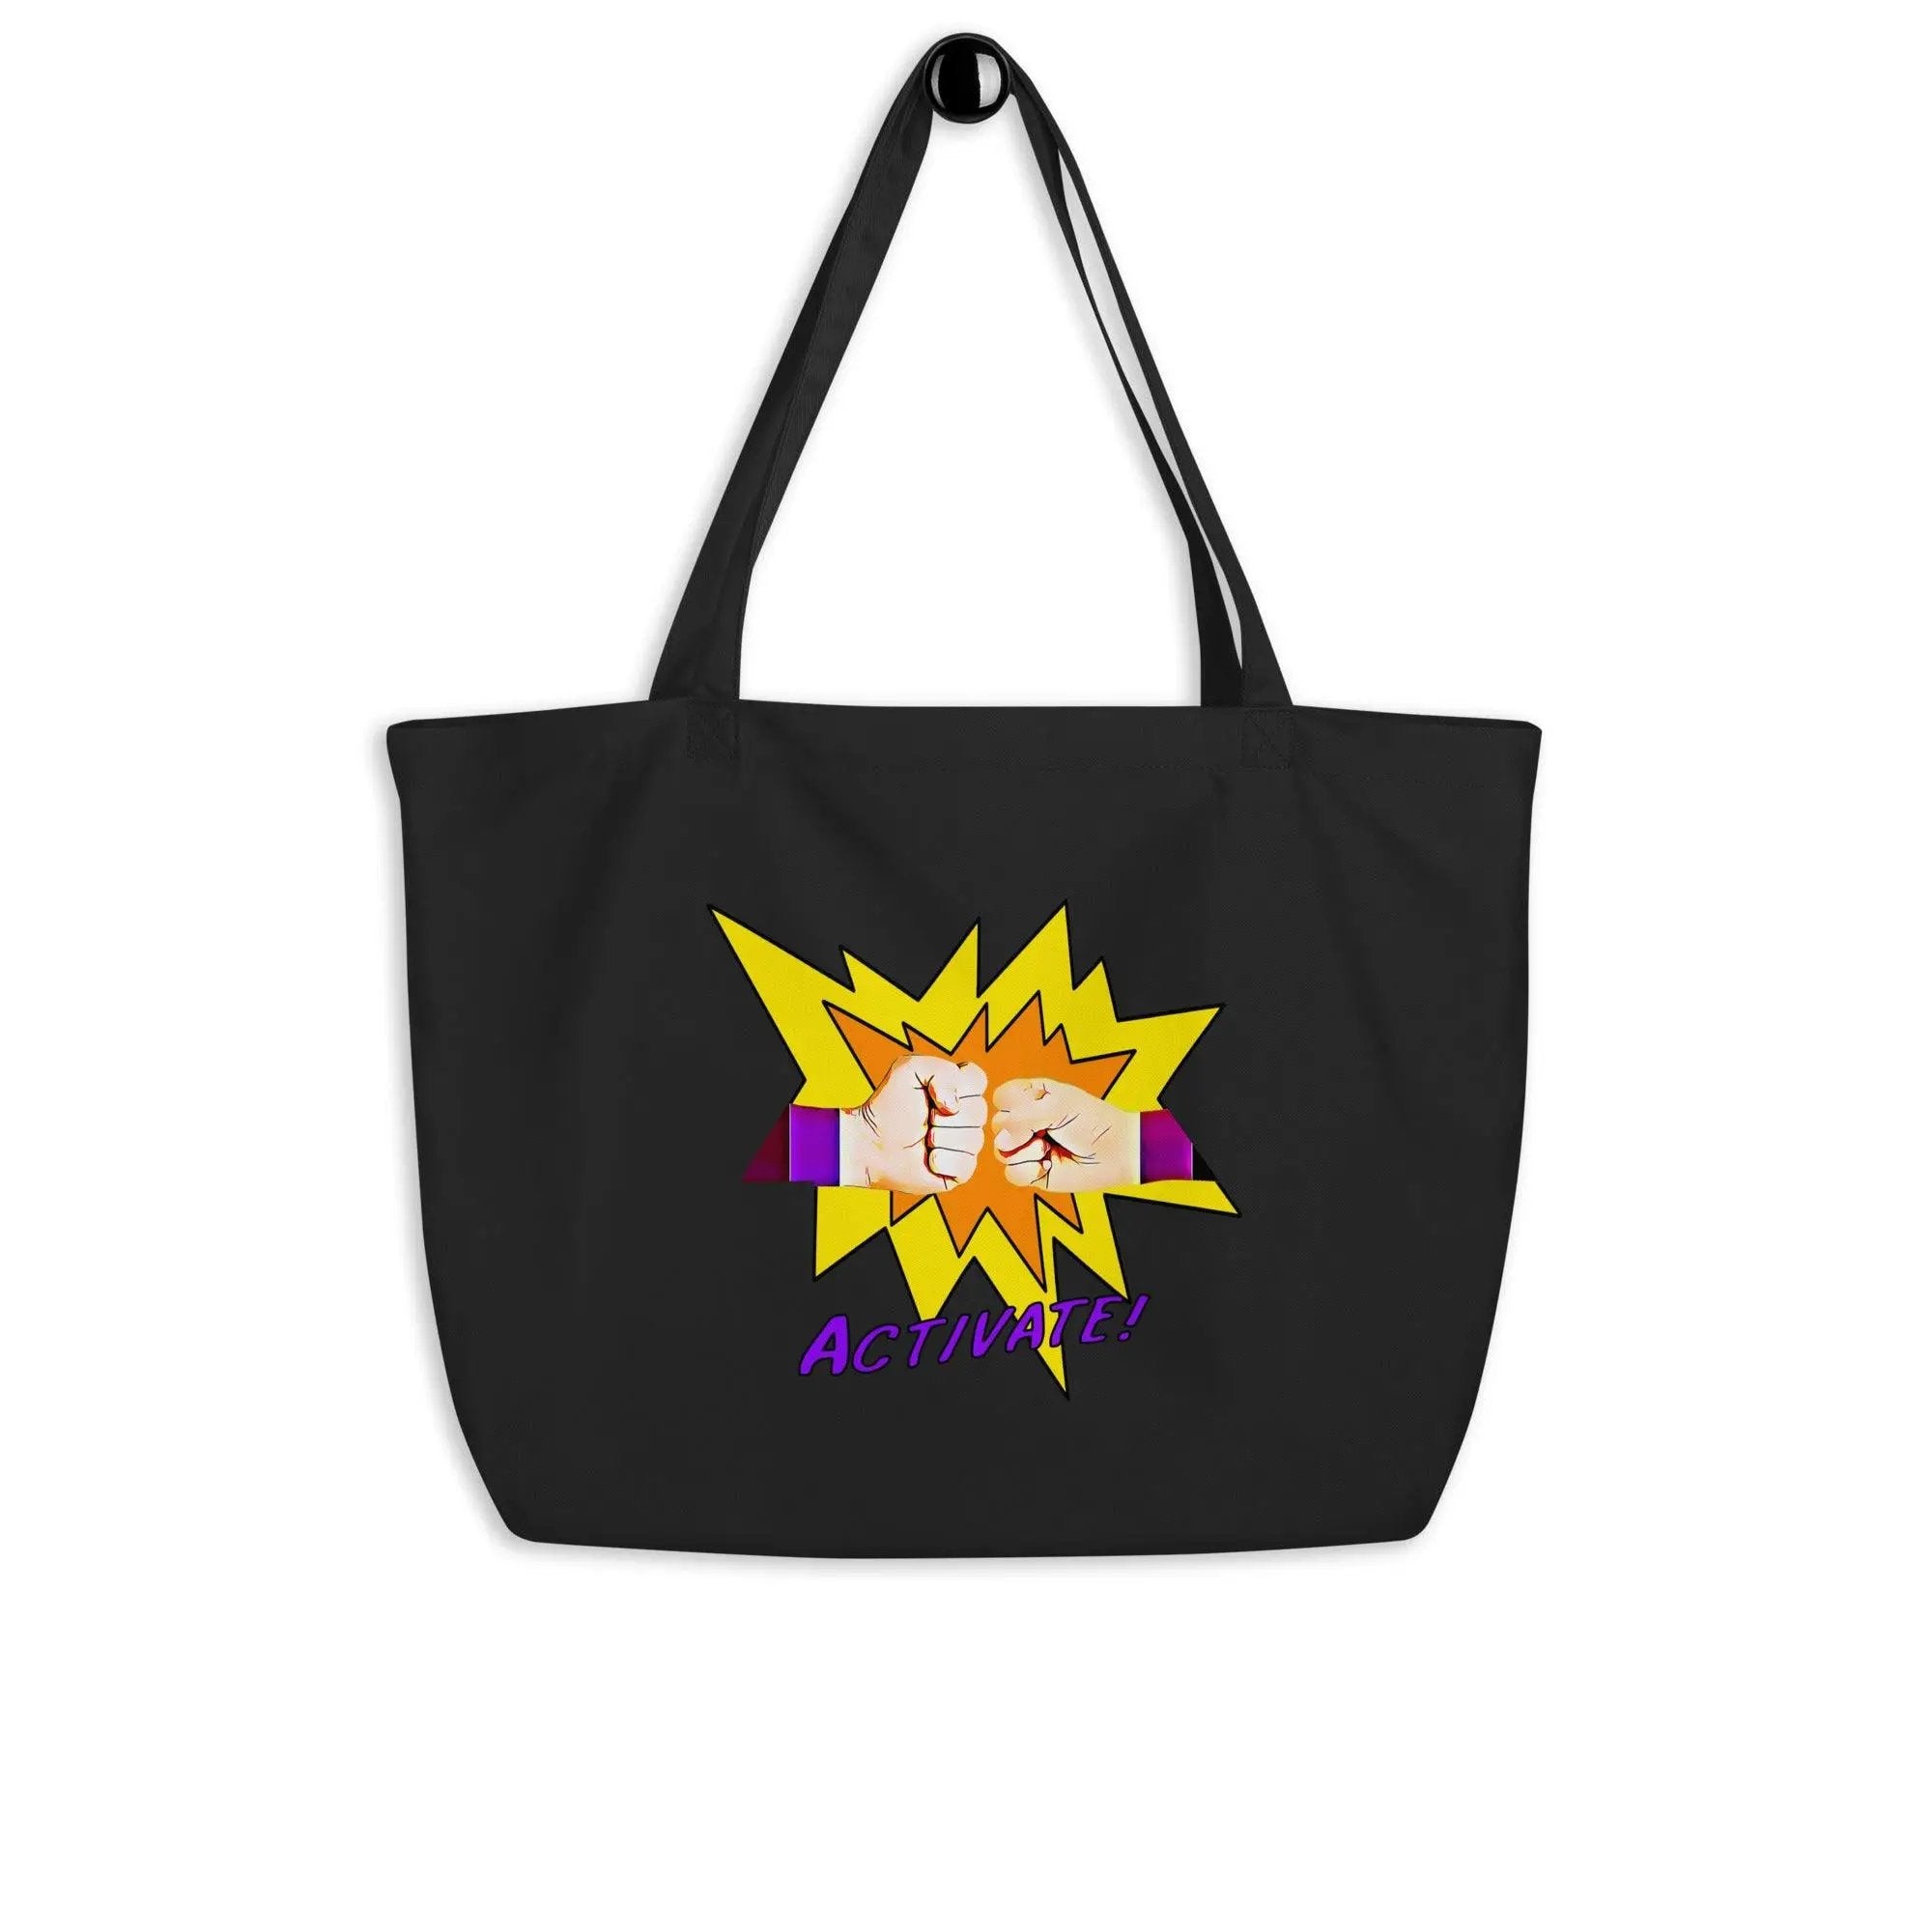 Activate! Large organic tote bag VAWDesigns